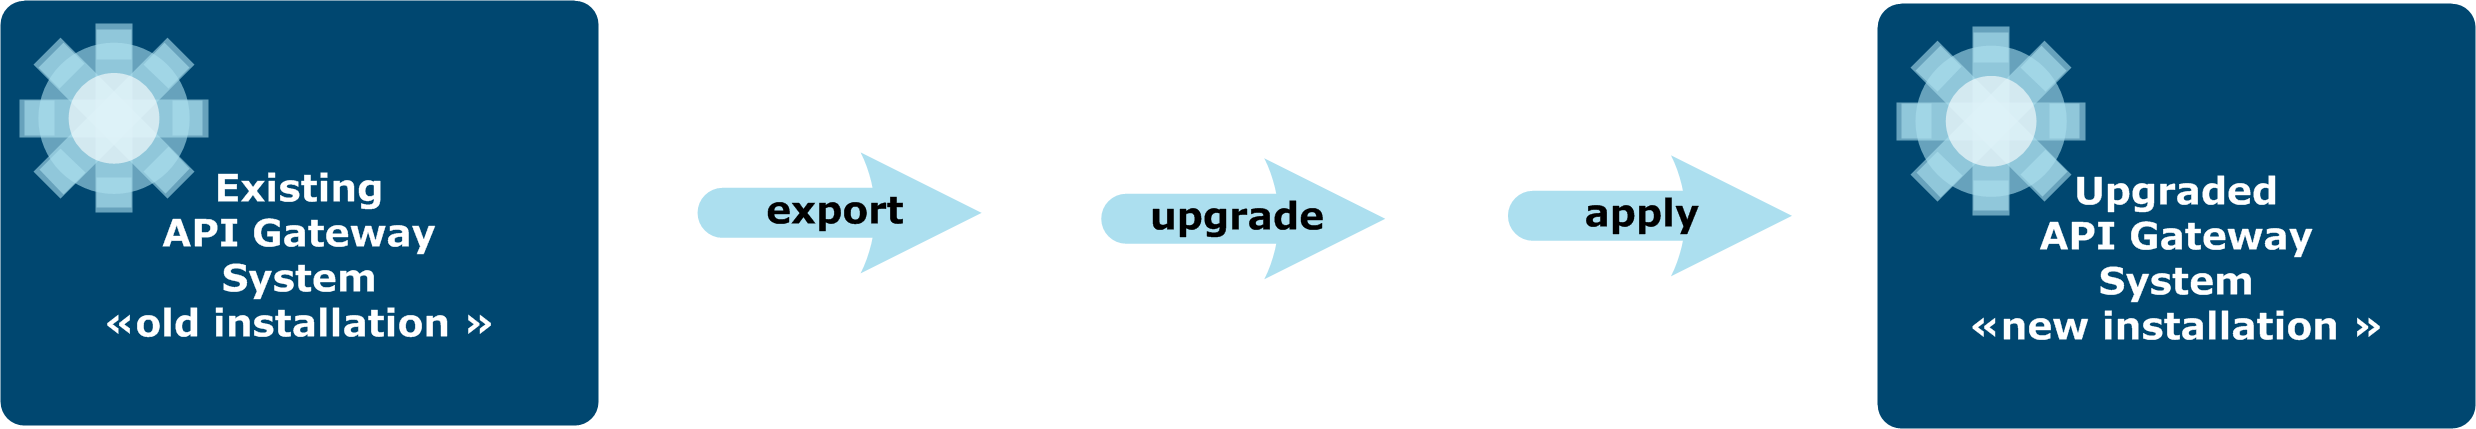 Overview of upgrade process